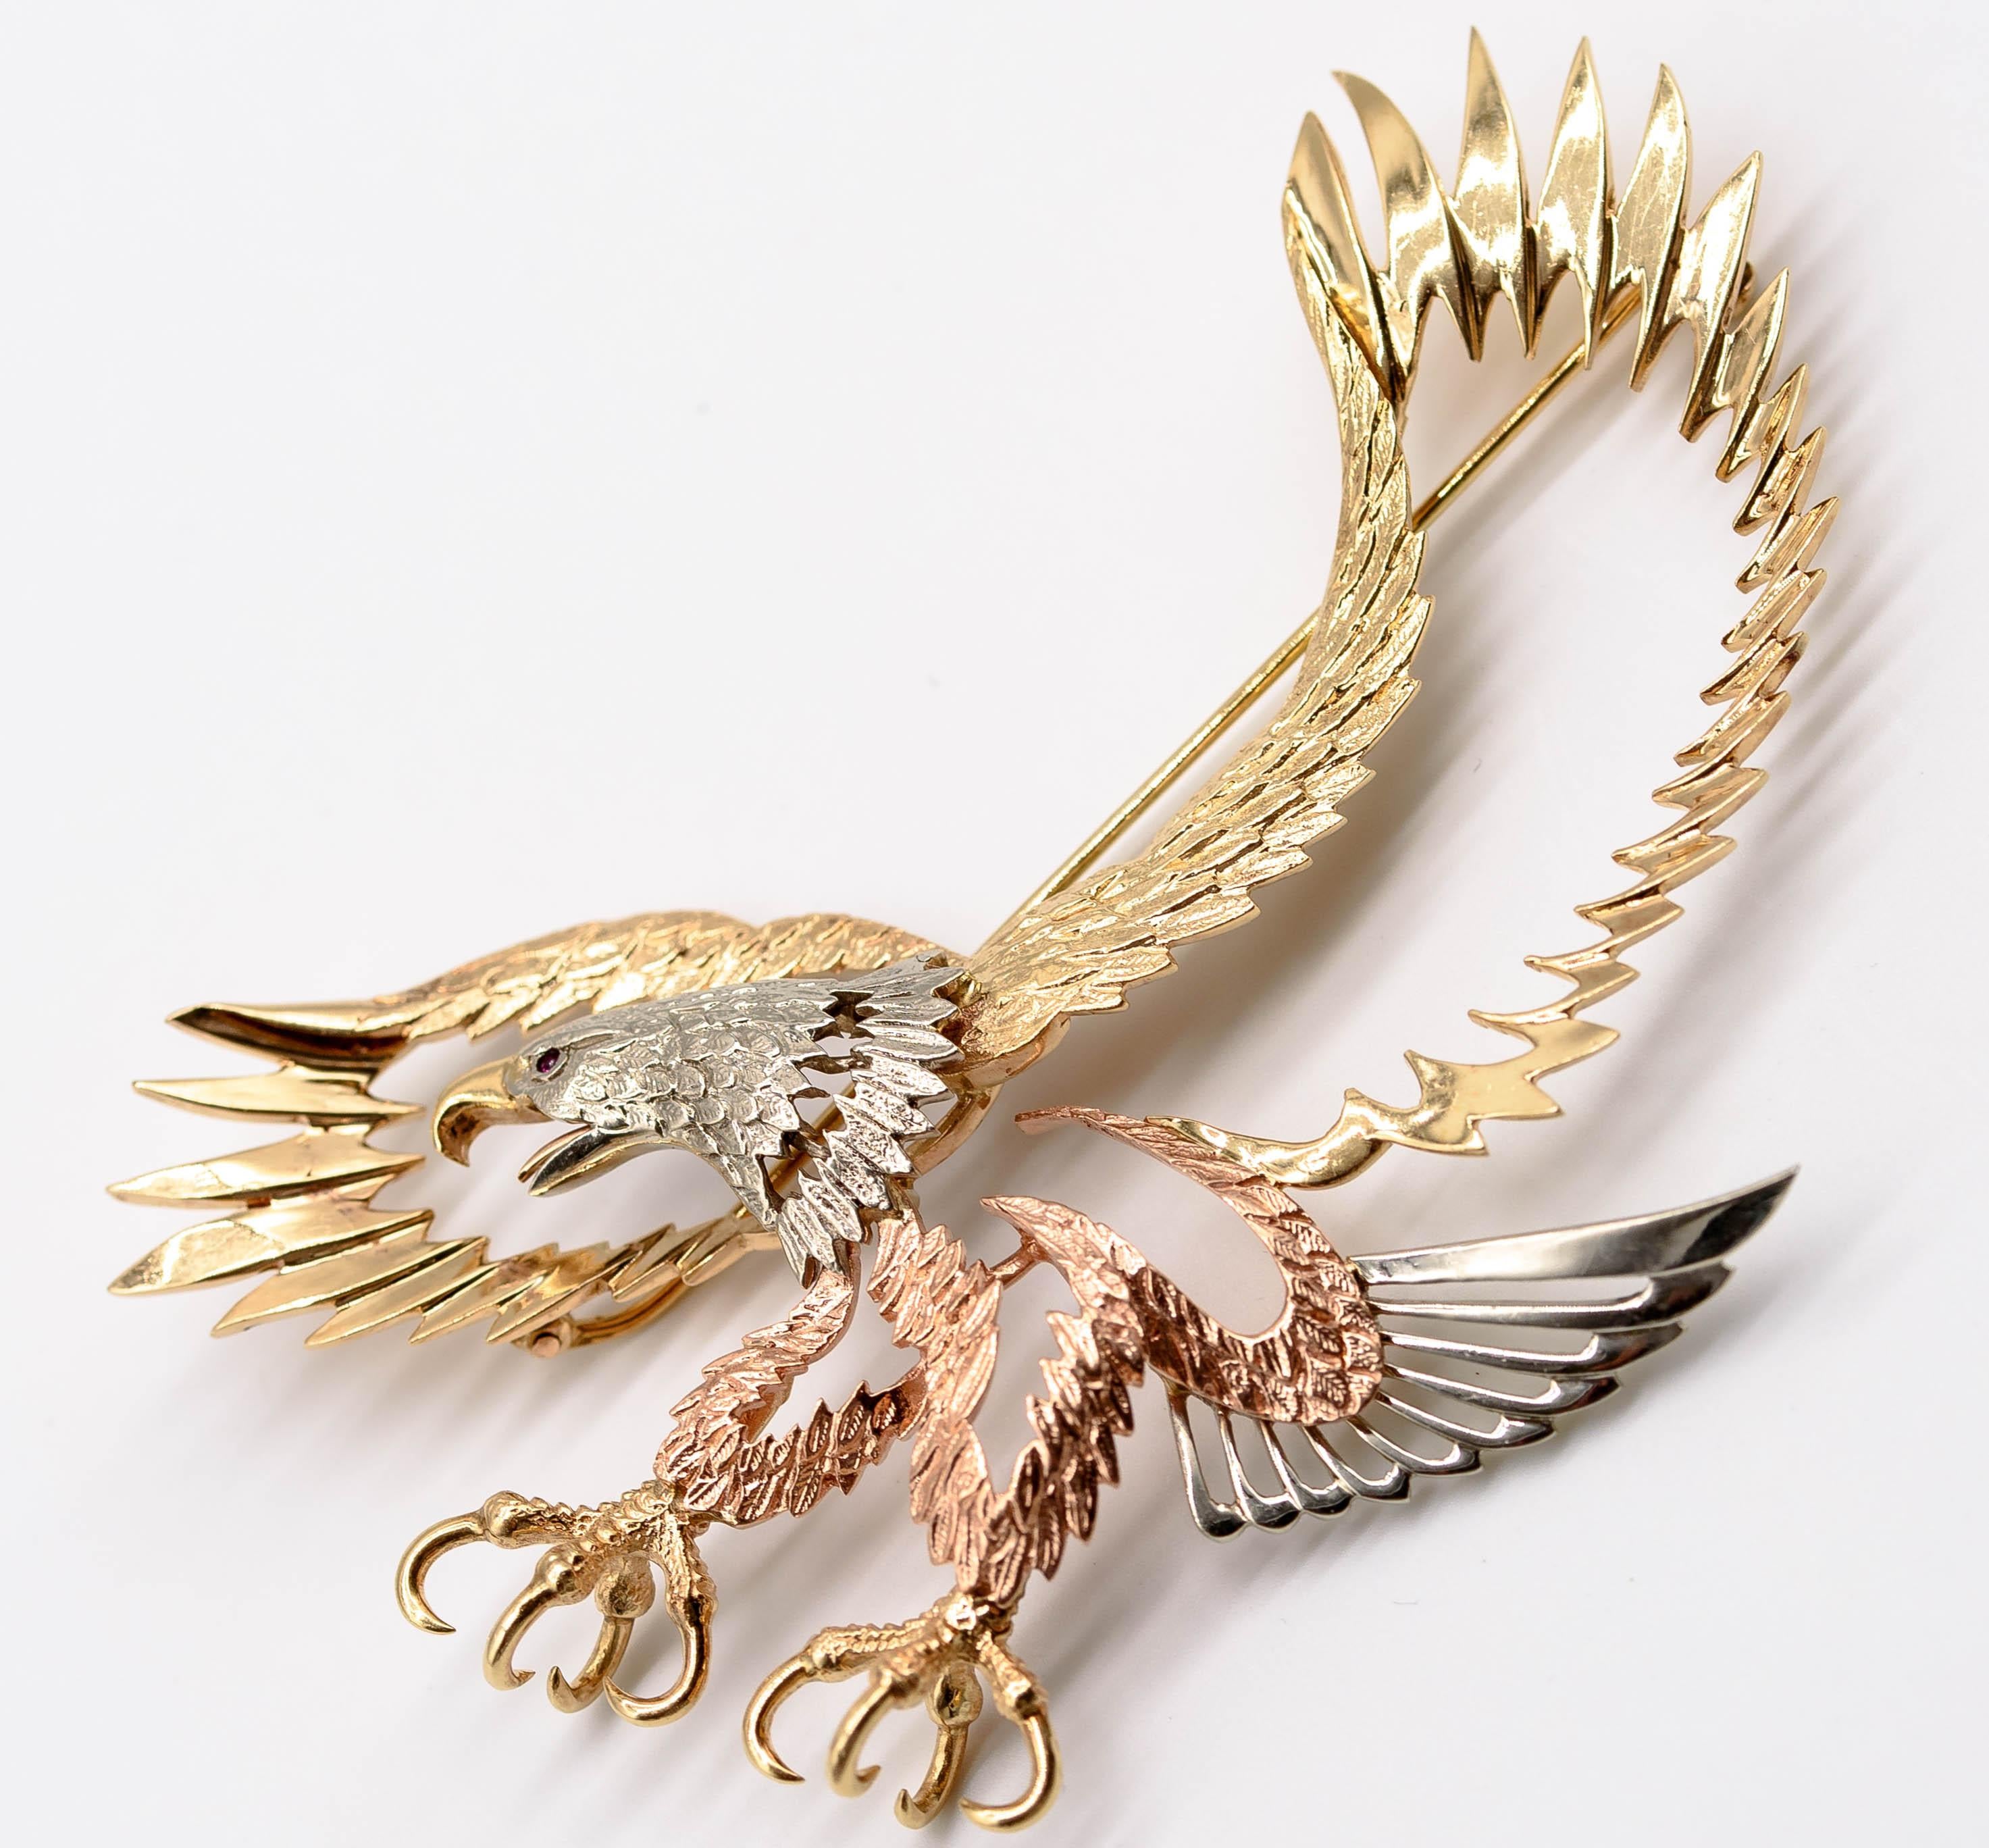 An expansive and elegant brooch depicting an eagle arching towards its prey with talons outstretched - and the brooch's owner gets to choose the nature of the prey.  Beautifully crafted in 14 karat yellow, rose, and white gold, the brooch spans 4